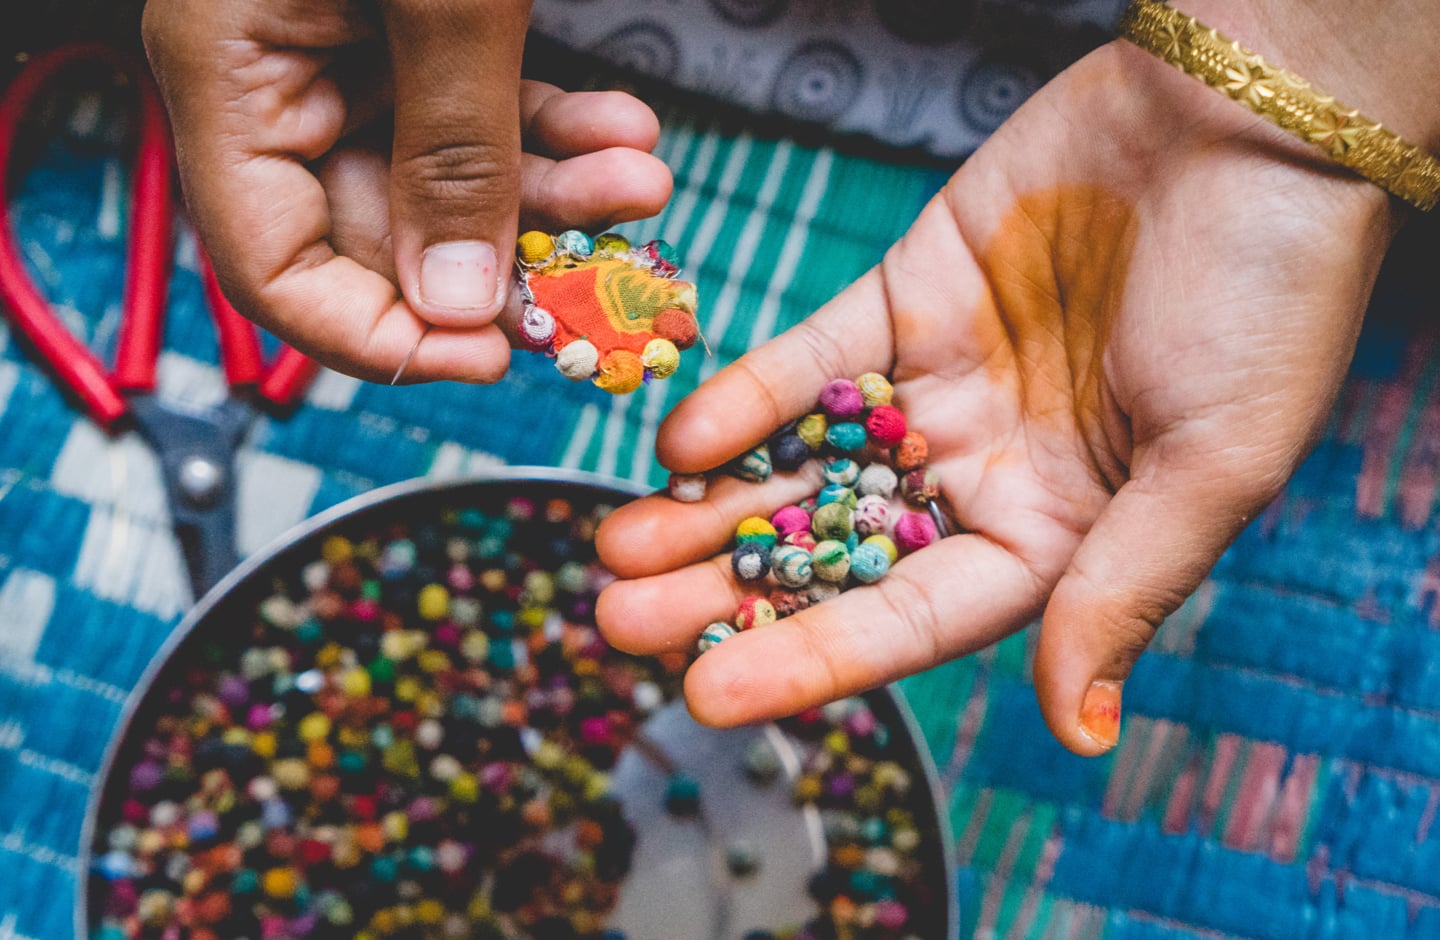 In one hand, an artisan holds an unfinished earring. In the other, a pile of Kantha beads.